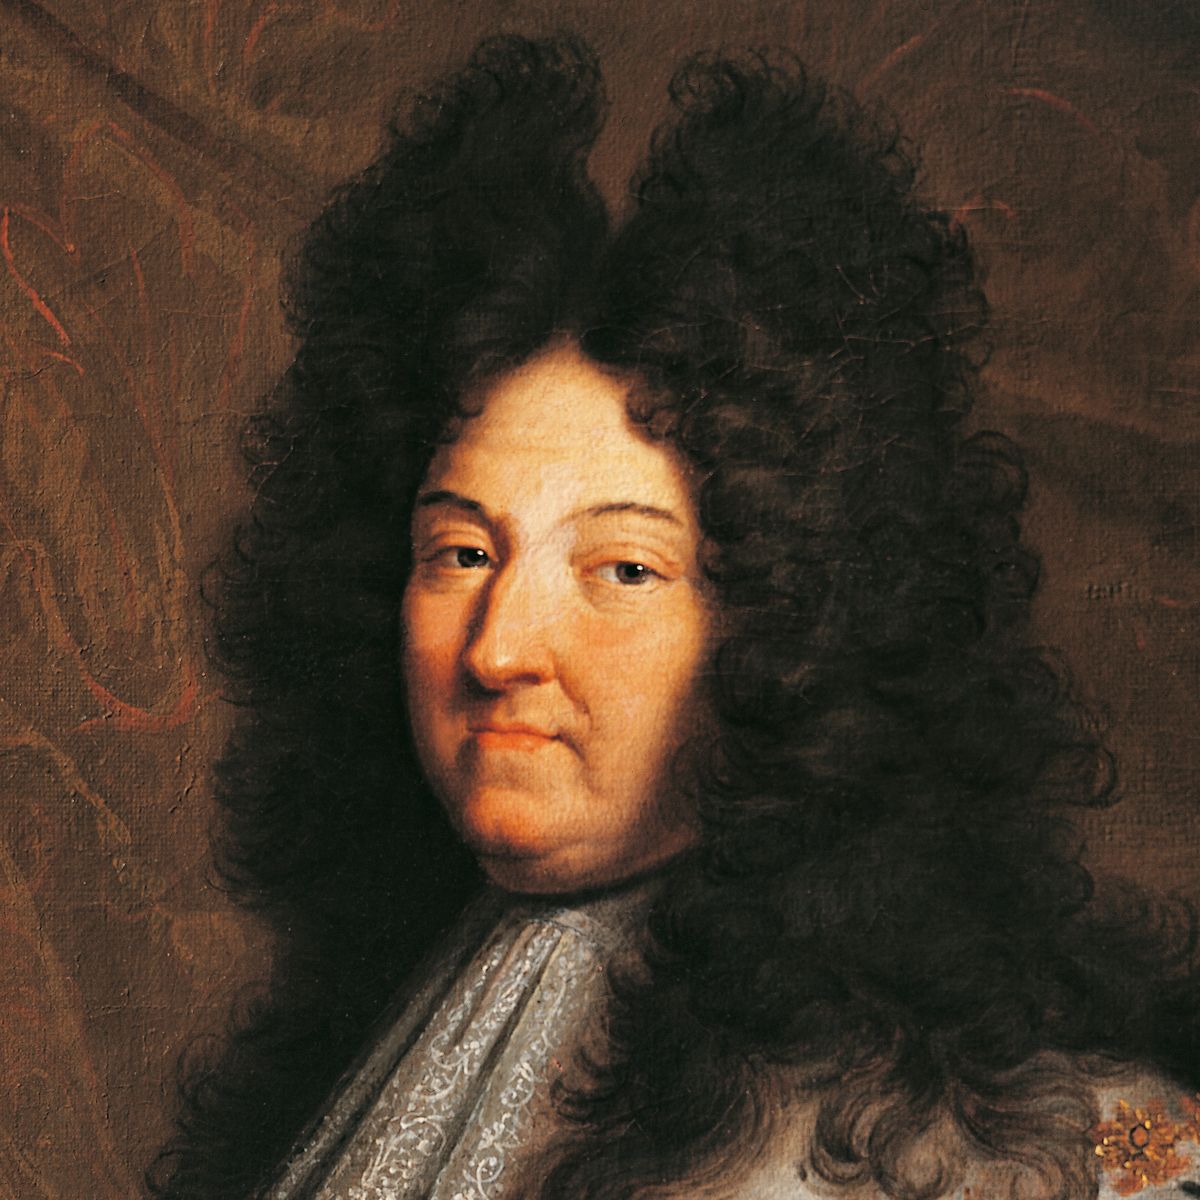 Louis XIV (The Sun King of France) - On This Day